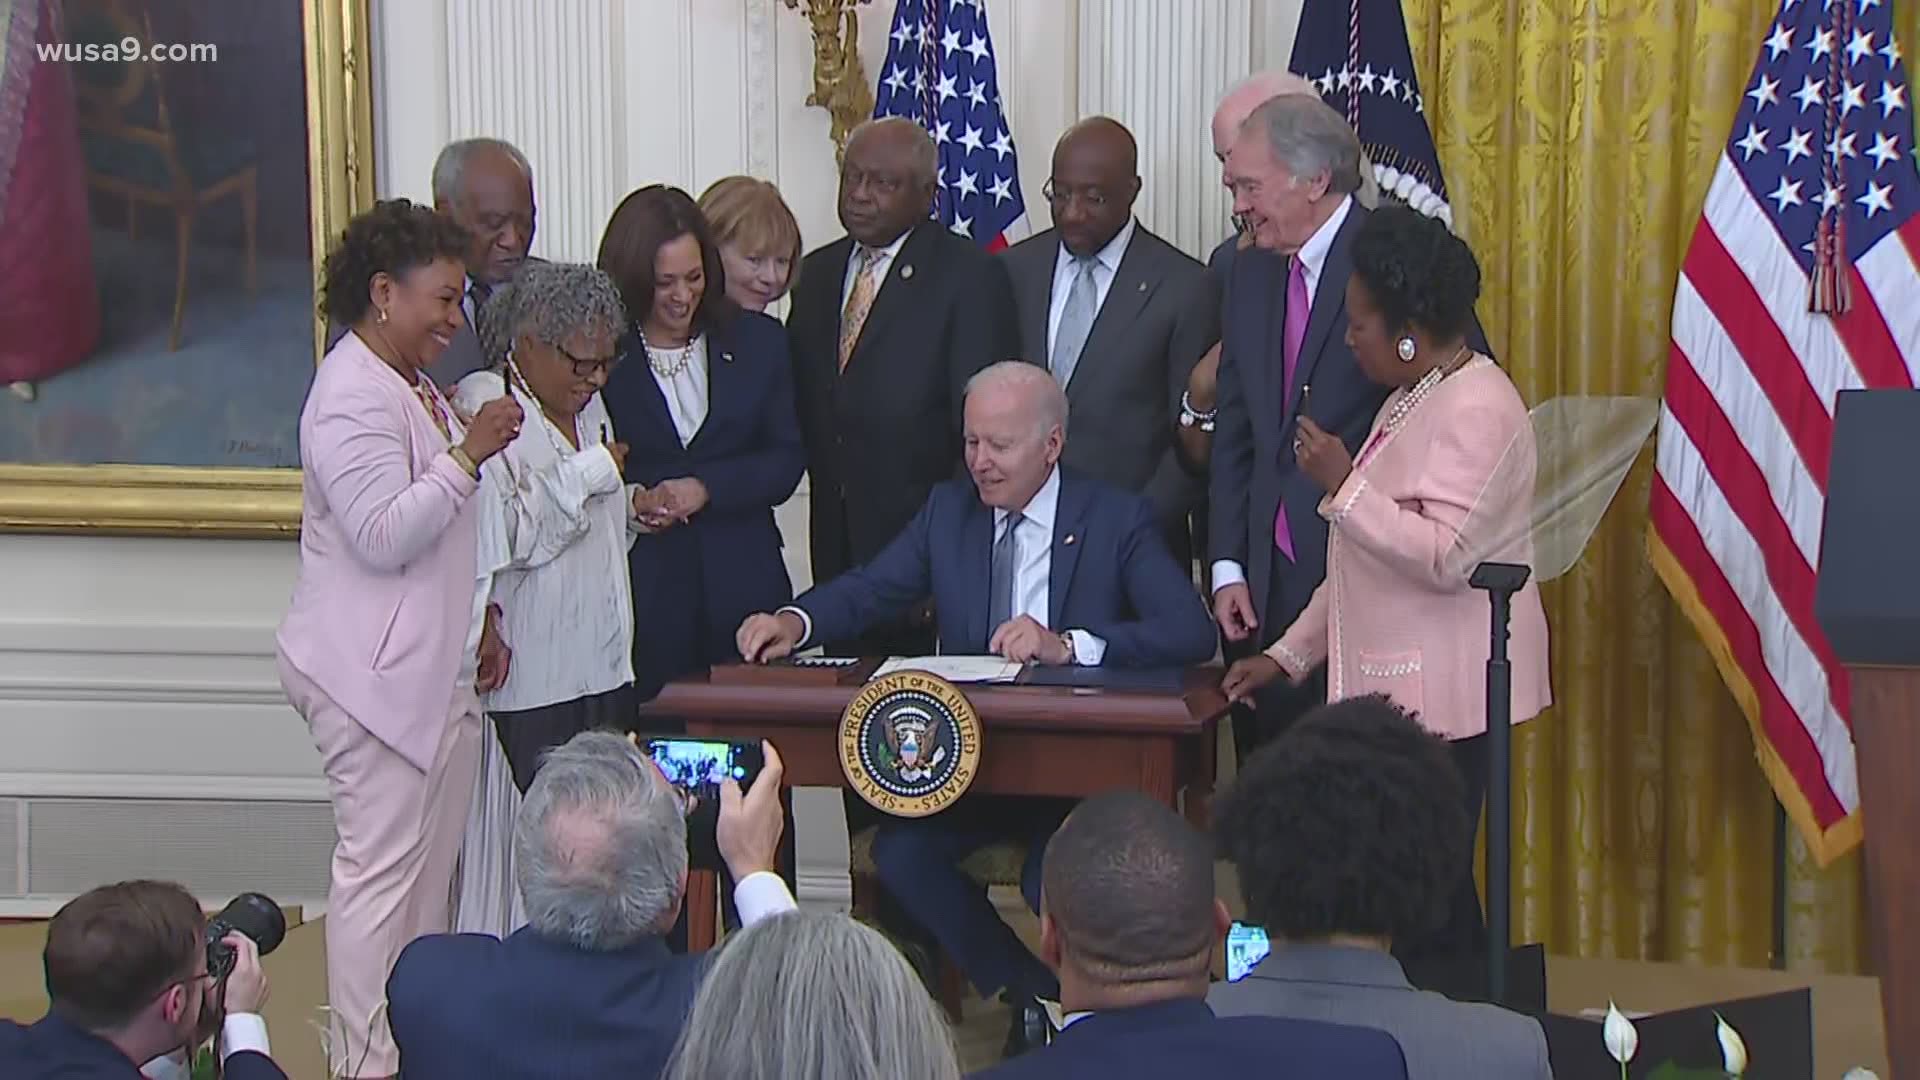 Juneteenth will become the country's newest federal holiday since 1983. President Biden is set to sign it in law.